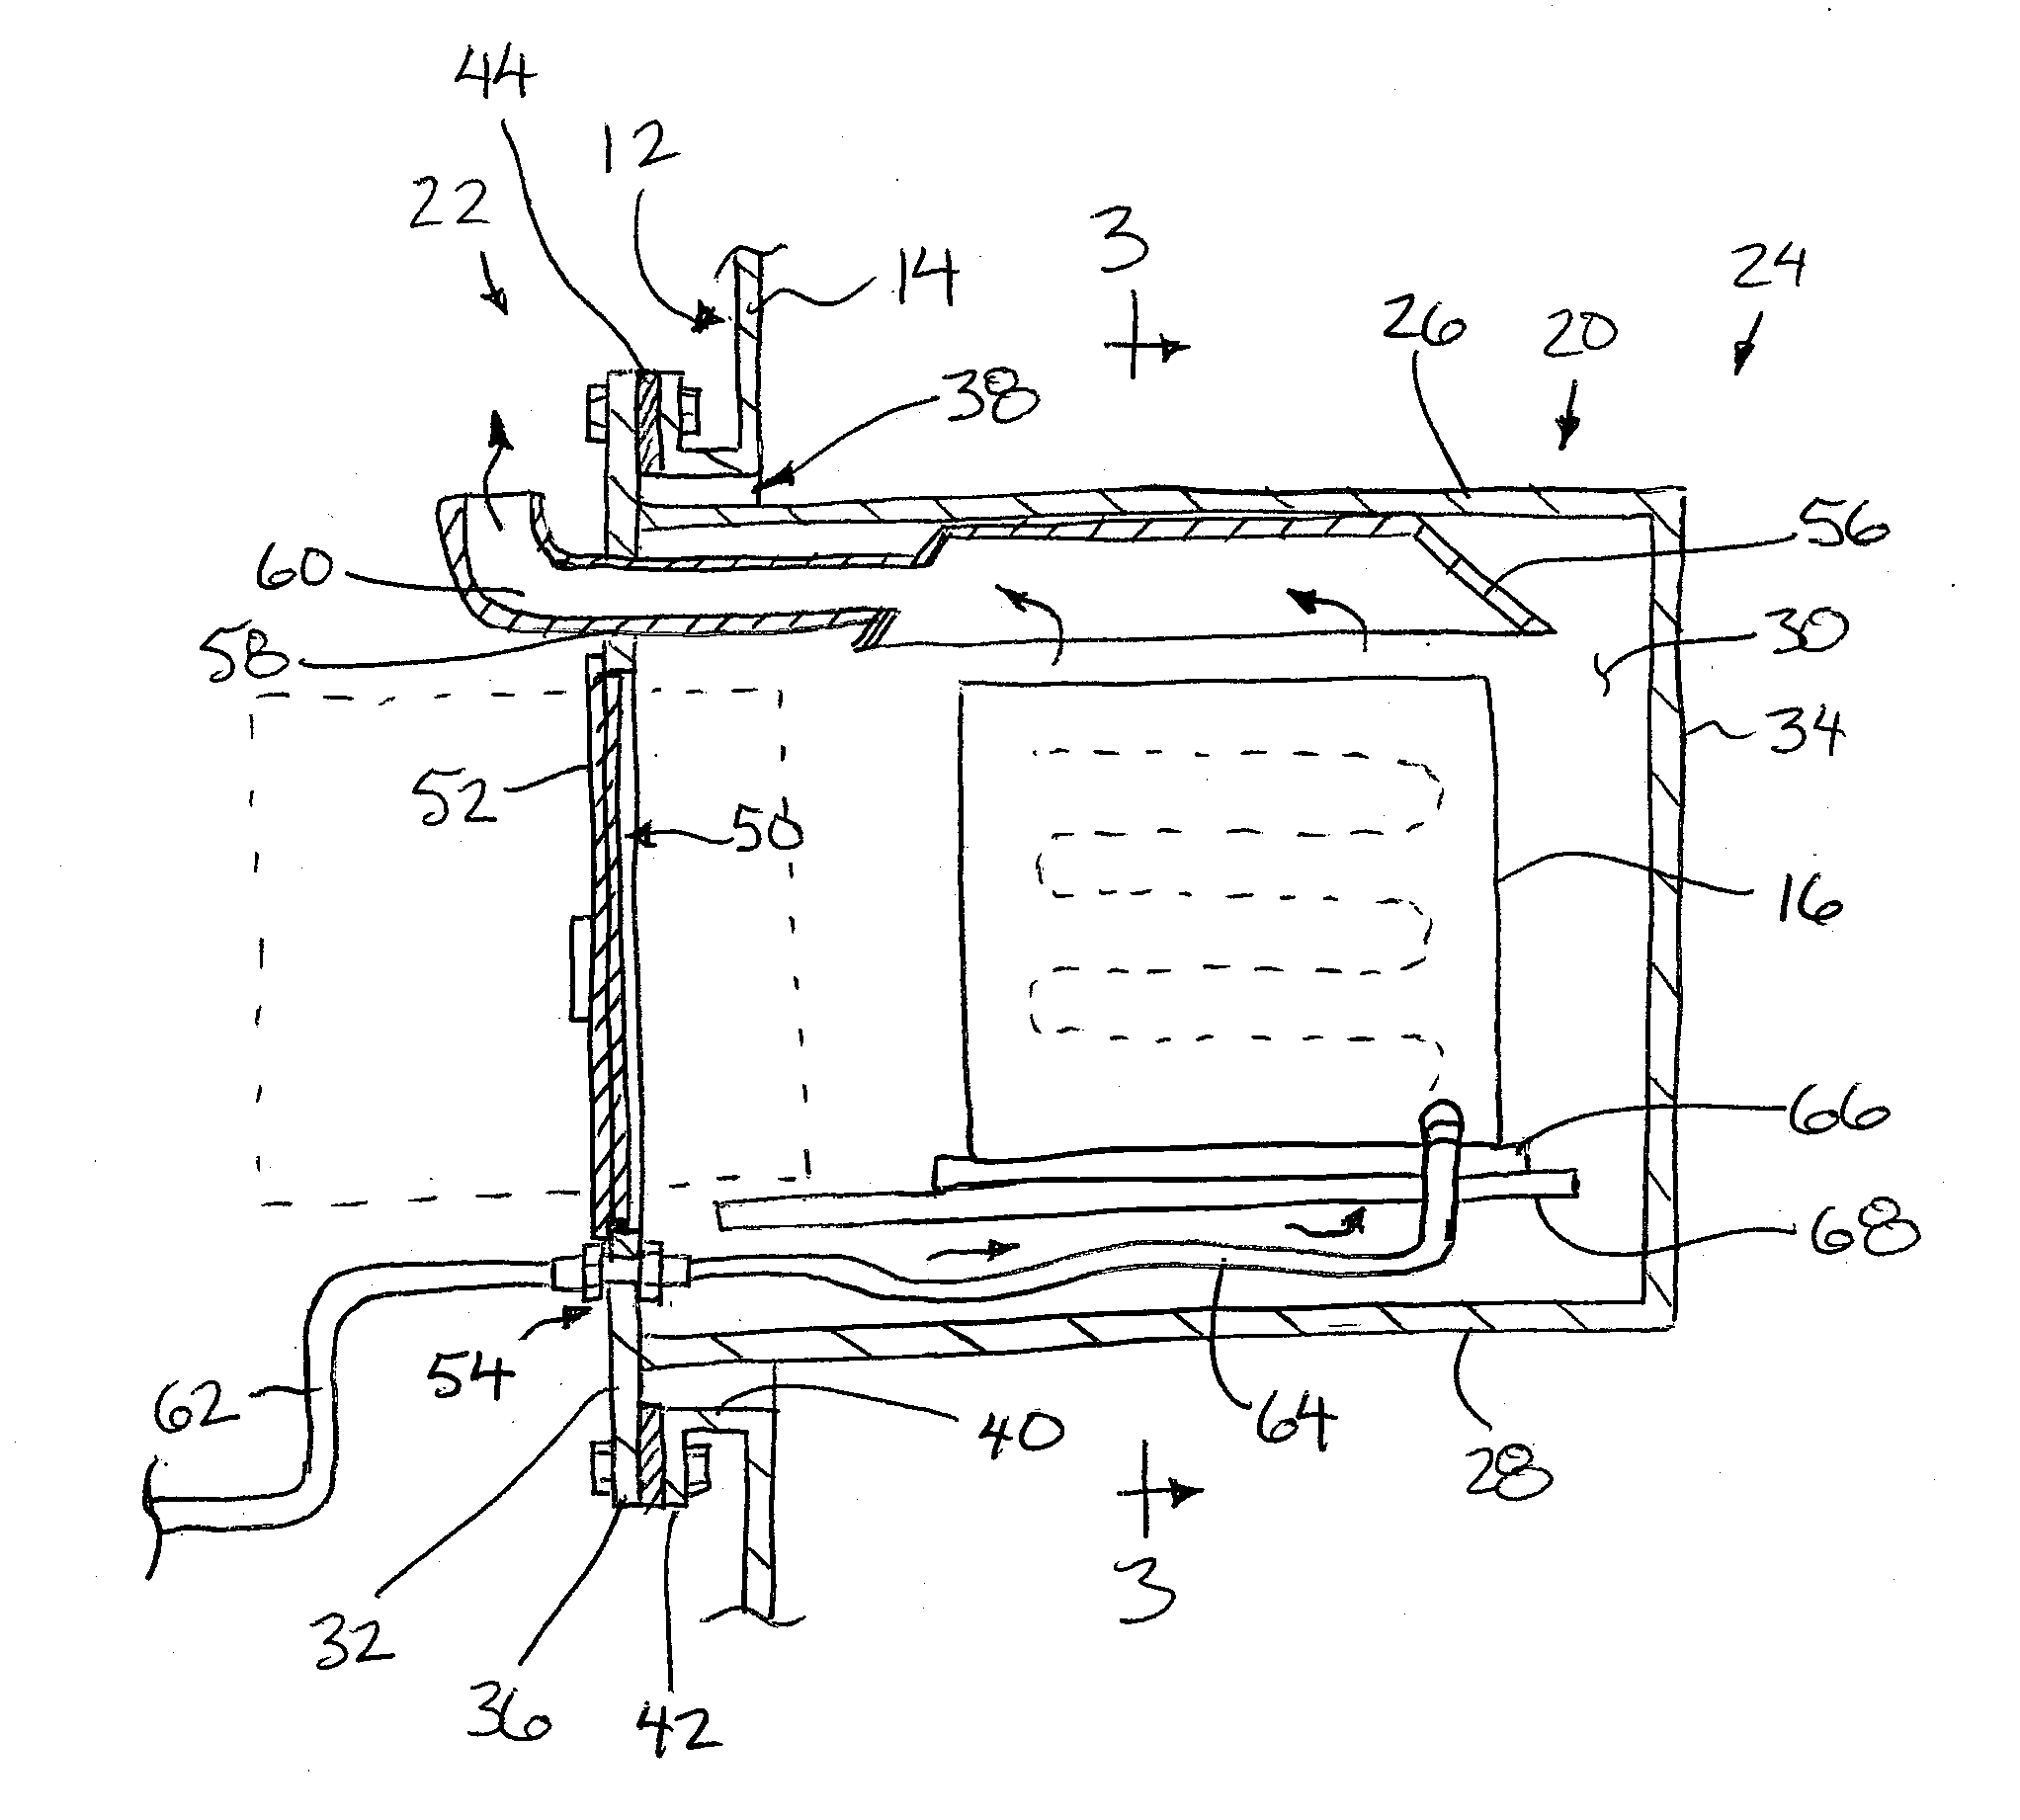 Catalytic Heating Assembly for an Oil Storage Tank